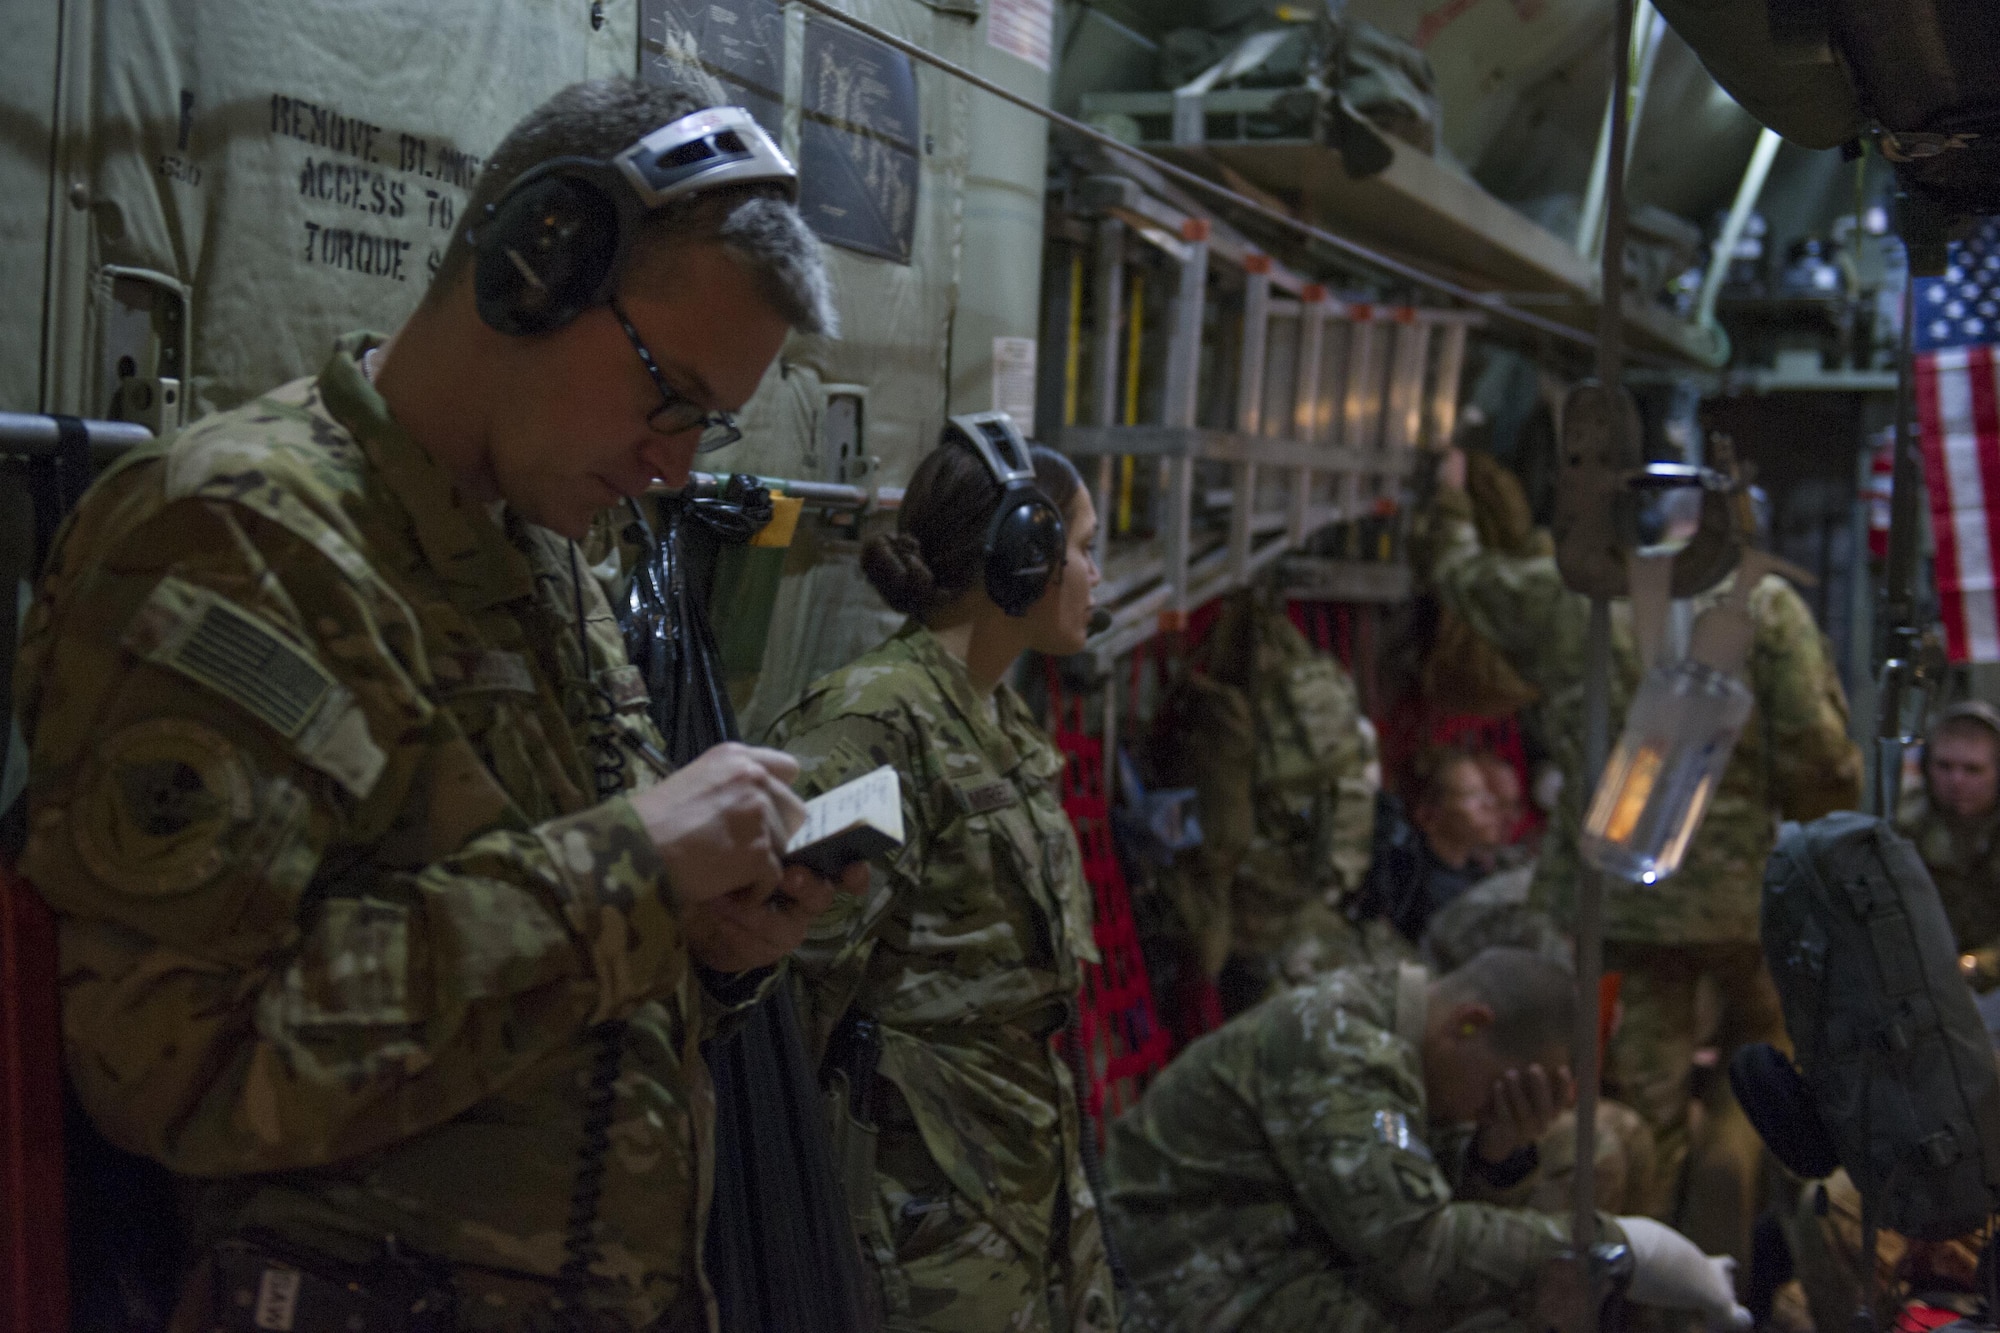 Capt. Steven Woods, 455th Expeditionary Aeromedical Evacuation Squadron flight nurse, deployed from the 43rd AES at Pope Army Airfield, N.C., records patient notes during a medevac alert in-route to Al Udeid Air Base, Qatar, from Bagram Airfield, Afghanistan, Nov. 6, 2015. The 455th EAES is tasked with moving injured and sick patients to locations with higher levels of medical care. (U.S. Air Force photo by Tech. Sgt. Robert Cloys/RELEASED)